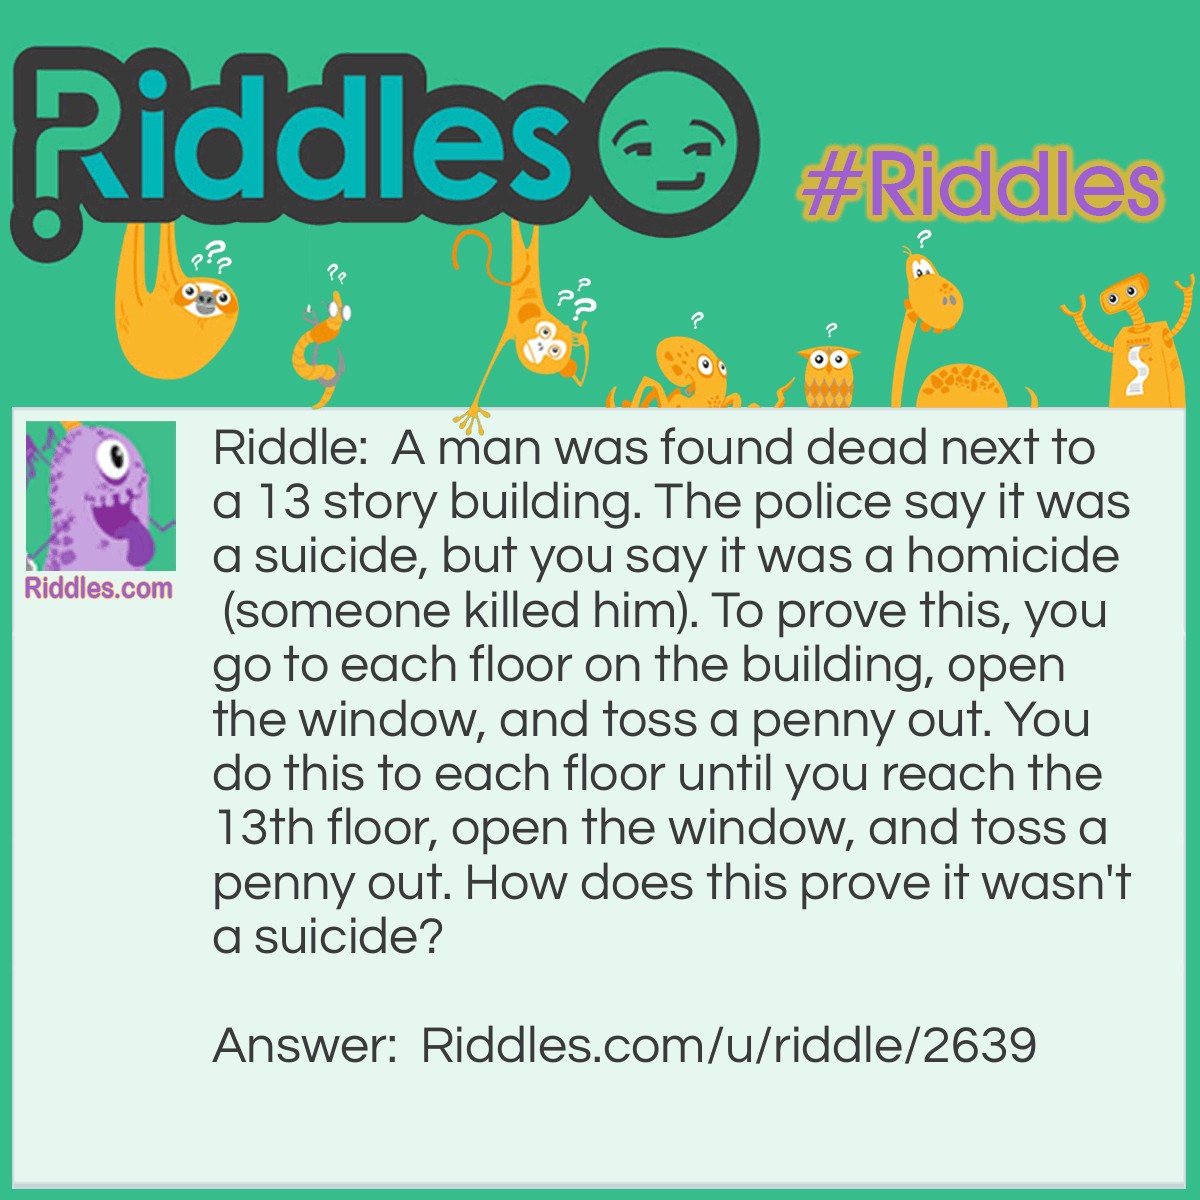 Riddle: A man was found dead next to a 13 story building. The police say it was a suicide, but you say it was a homicide (someone killed him). To prove this, you go to each floor on the building, open the window, and toss a penny out. You do this to each floor until you reach the 13th floor, open the window, and toss a penny out. How does this prove it wasn't a suicide? Answer: If the man committed suicide, he would've left the window open and you wouldn't have had to open it.